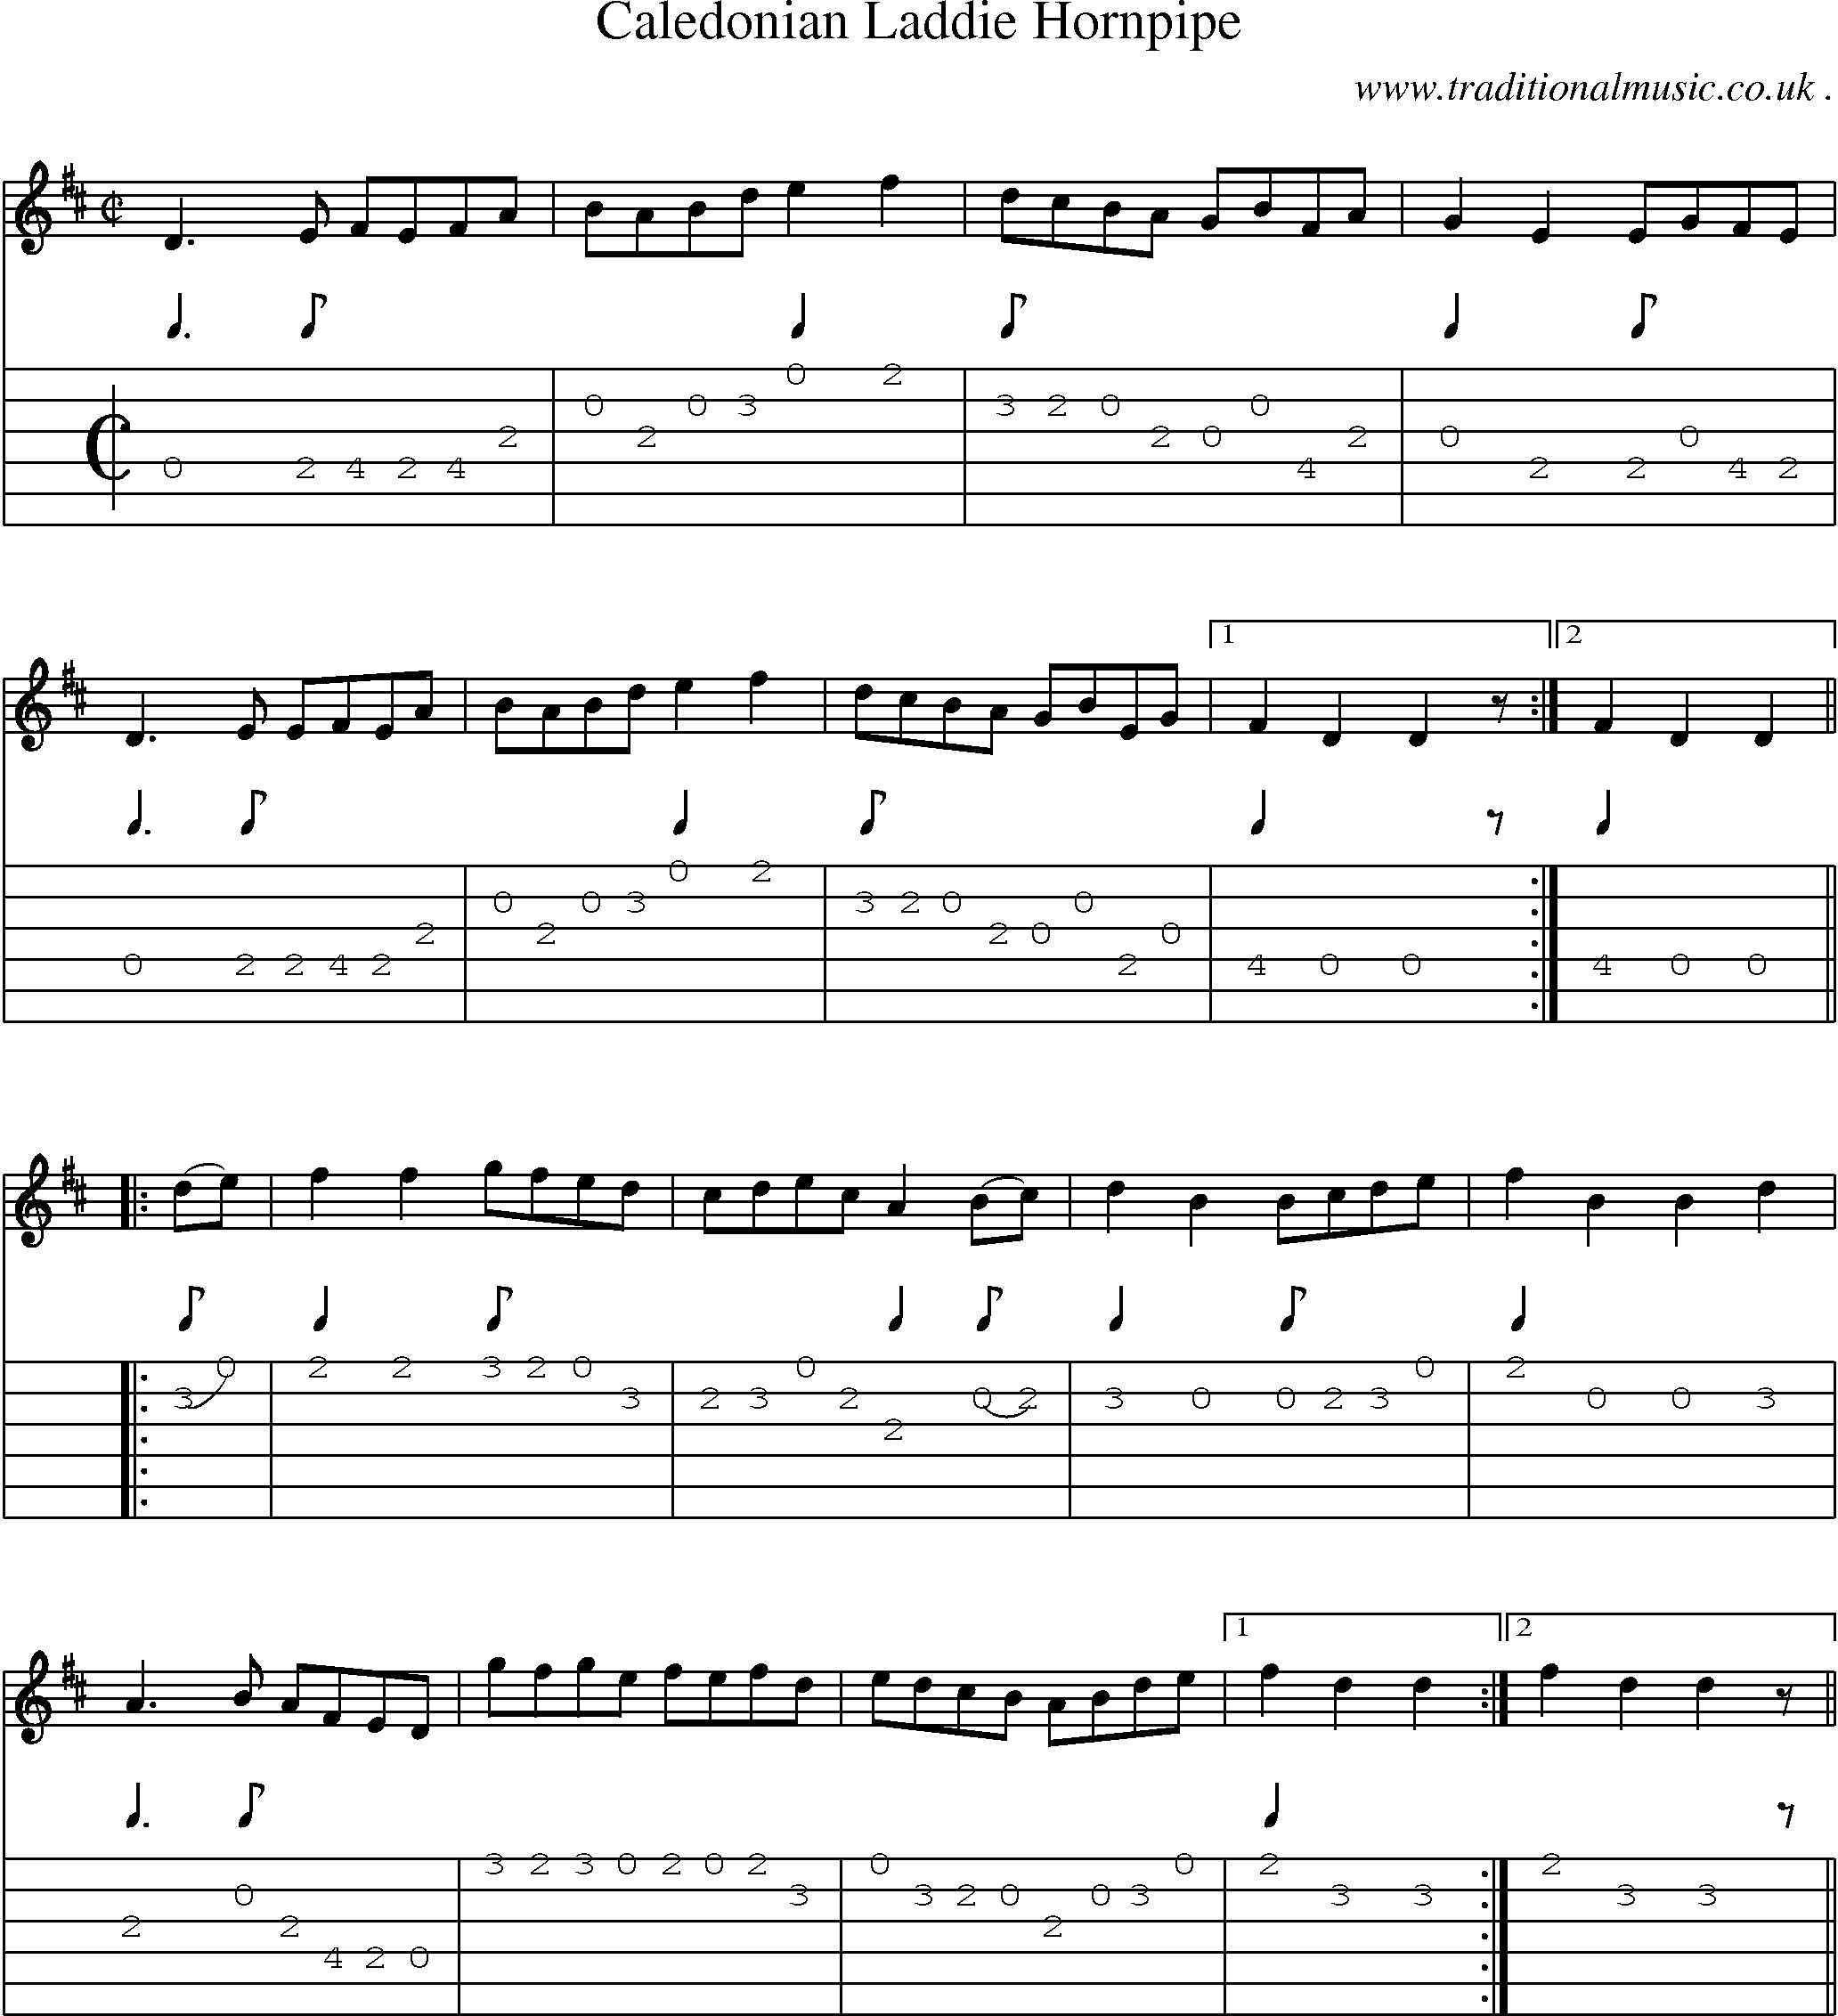 Sheet-Music and Guitar Tabs for Caledonian Laddie Hornpipe